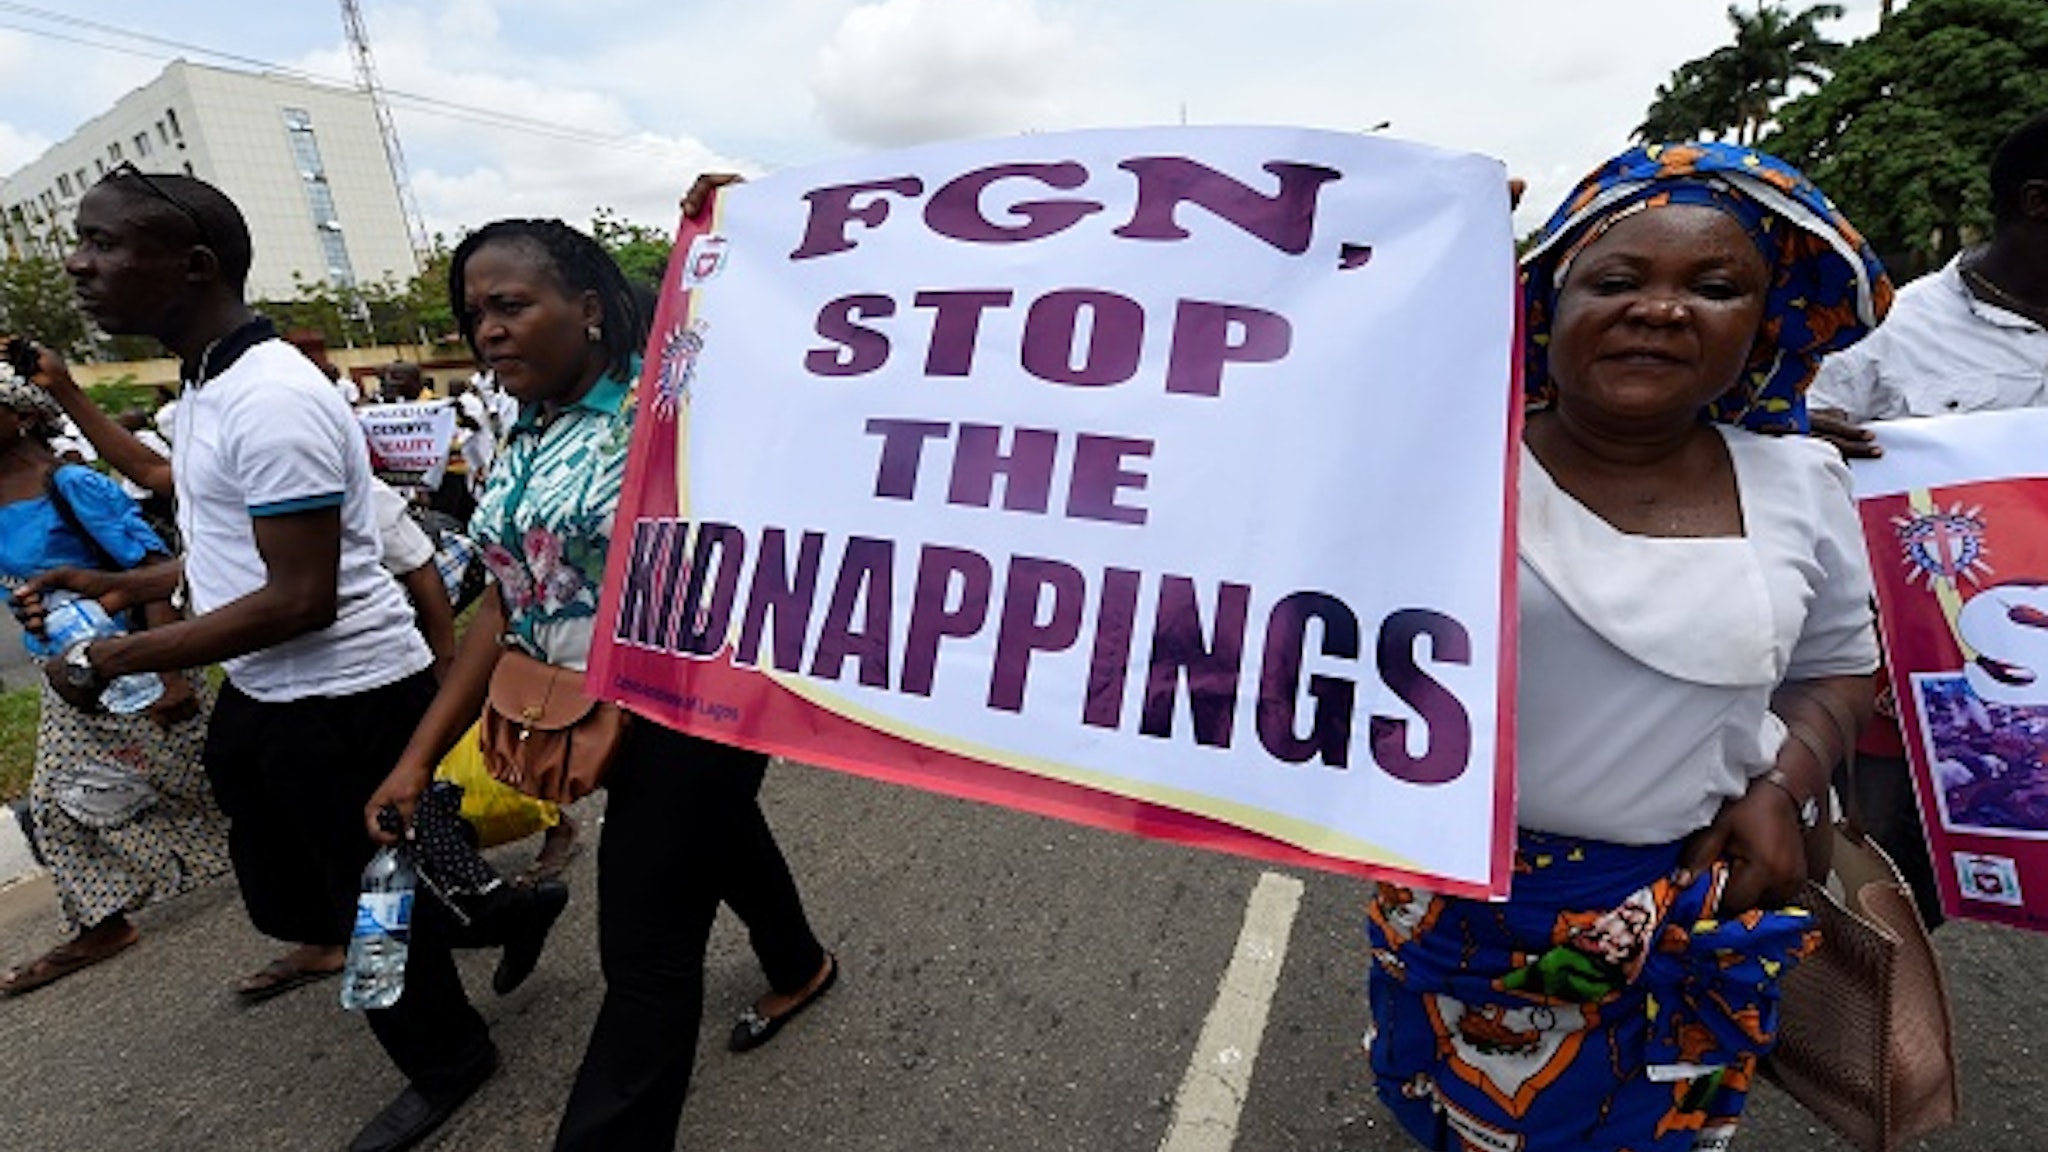 Women take part in a march to protest against victims of violent attacks across the country in Lagos, on May 22, 2018. - Catholic Churches in Nigeria held solidarity rally across the country to prortest against a church attack in Benue state that killed at least 18, including two Roman Catholic priests.